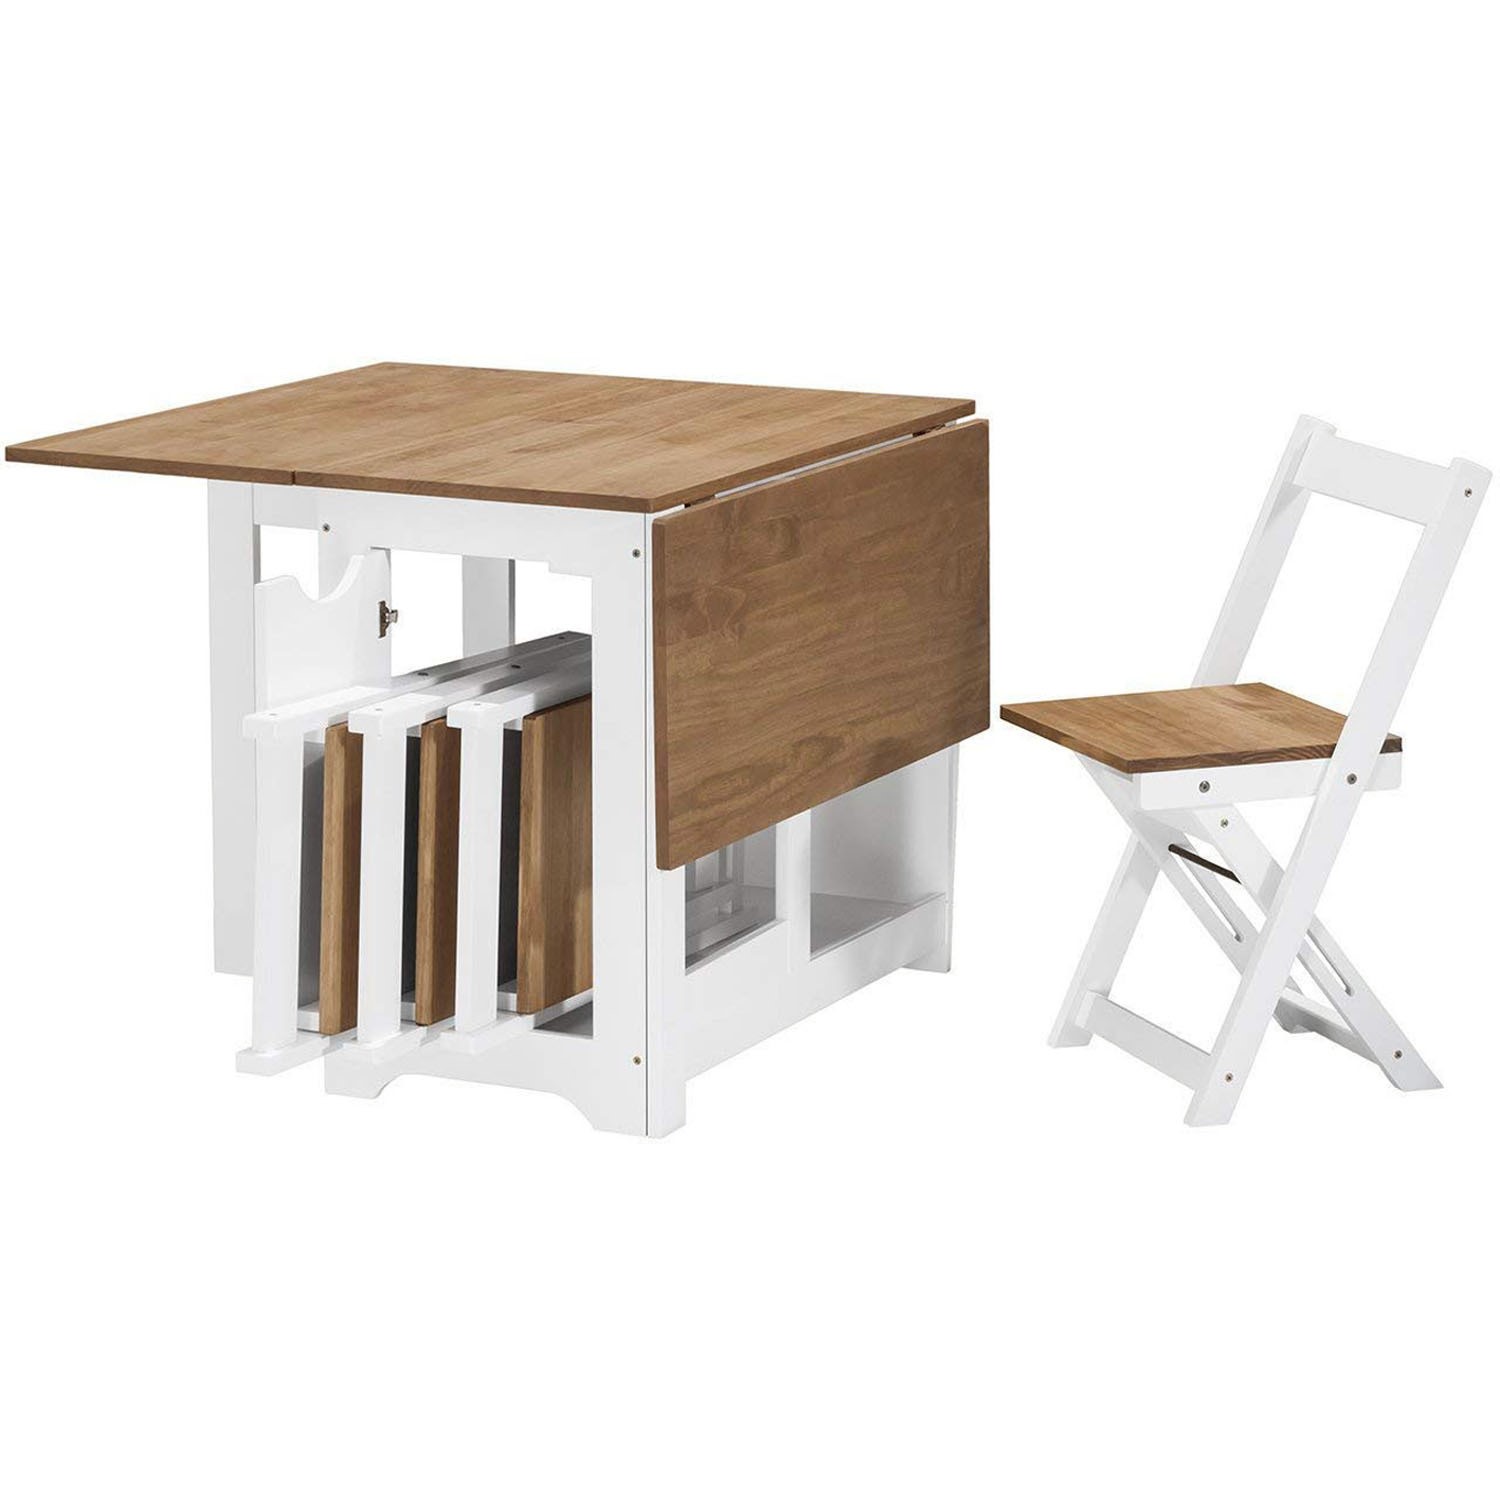 Seconique Santos Erfly Folding, Foldaway Dining Room Table And Chairs